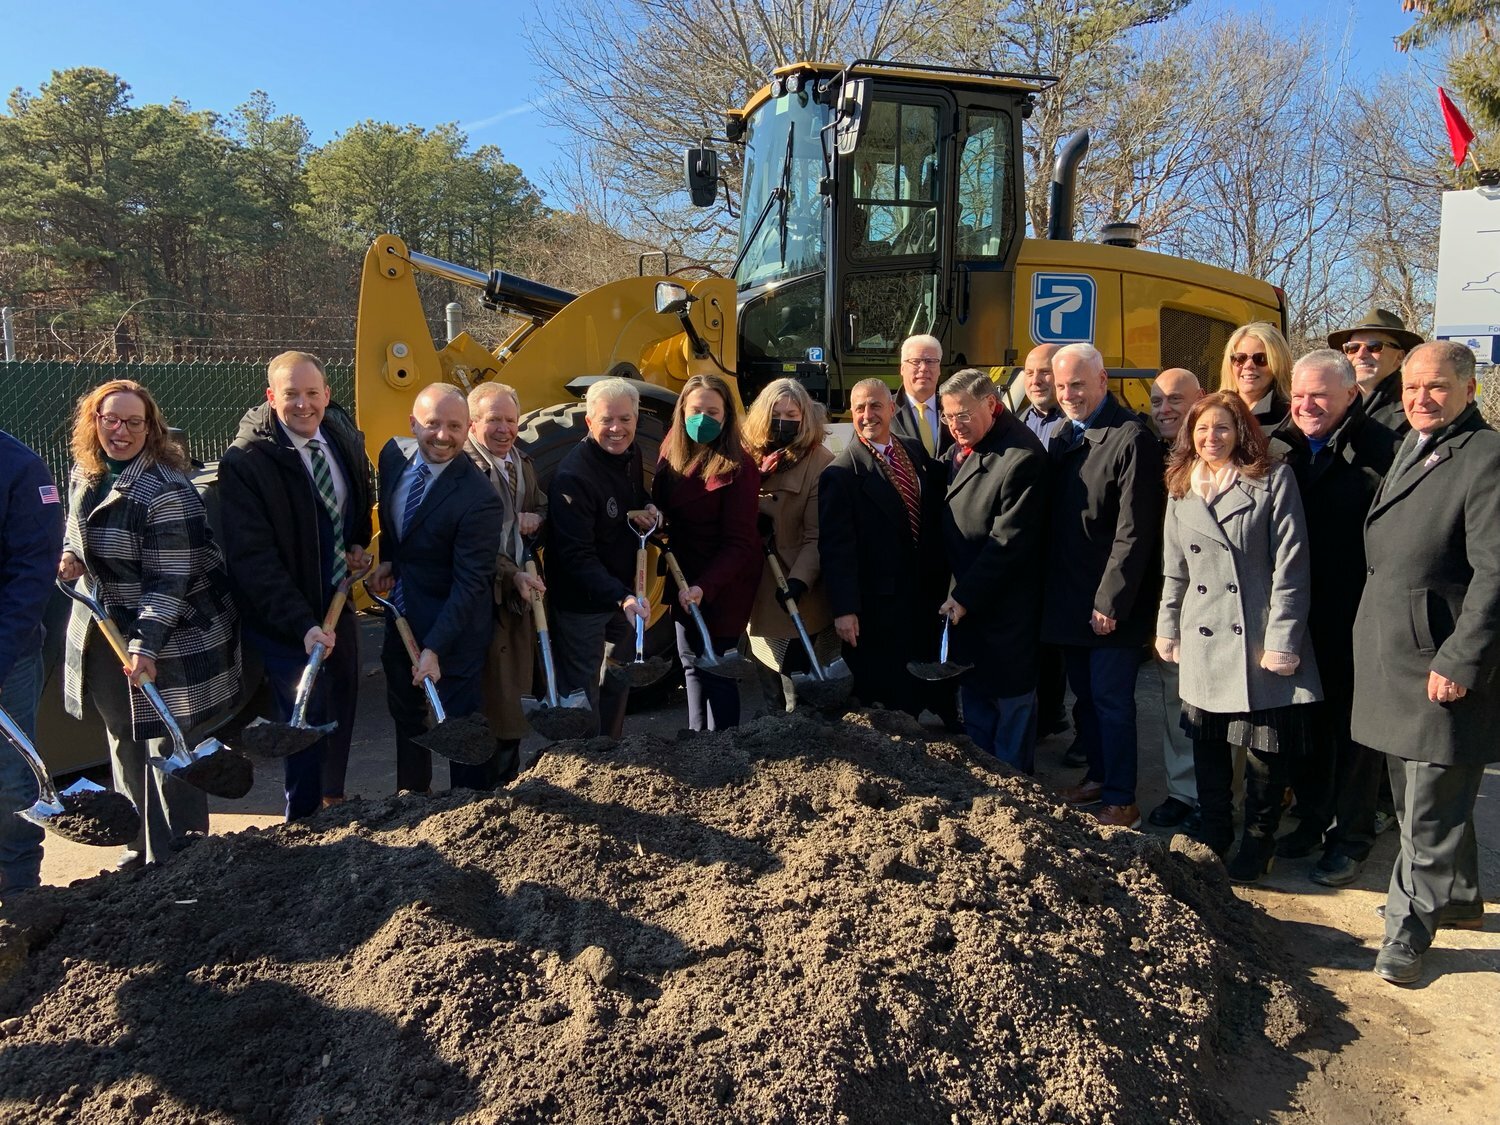 Gov. Kathy Hochul and Suffolk County executive Steve Bellone announced the groundbreaking of the $223.9 million Forge River Watershed Sewer District project, designed to reduce nitrogen loading and improve water quality for homeowners and businesses, located in the Mastic-Shirley area. Pictured is the groundbreaking.